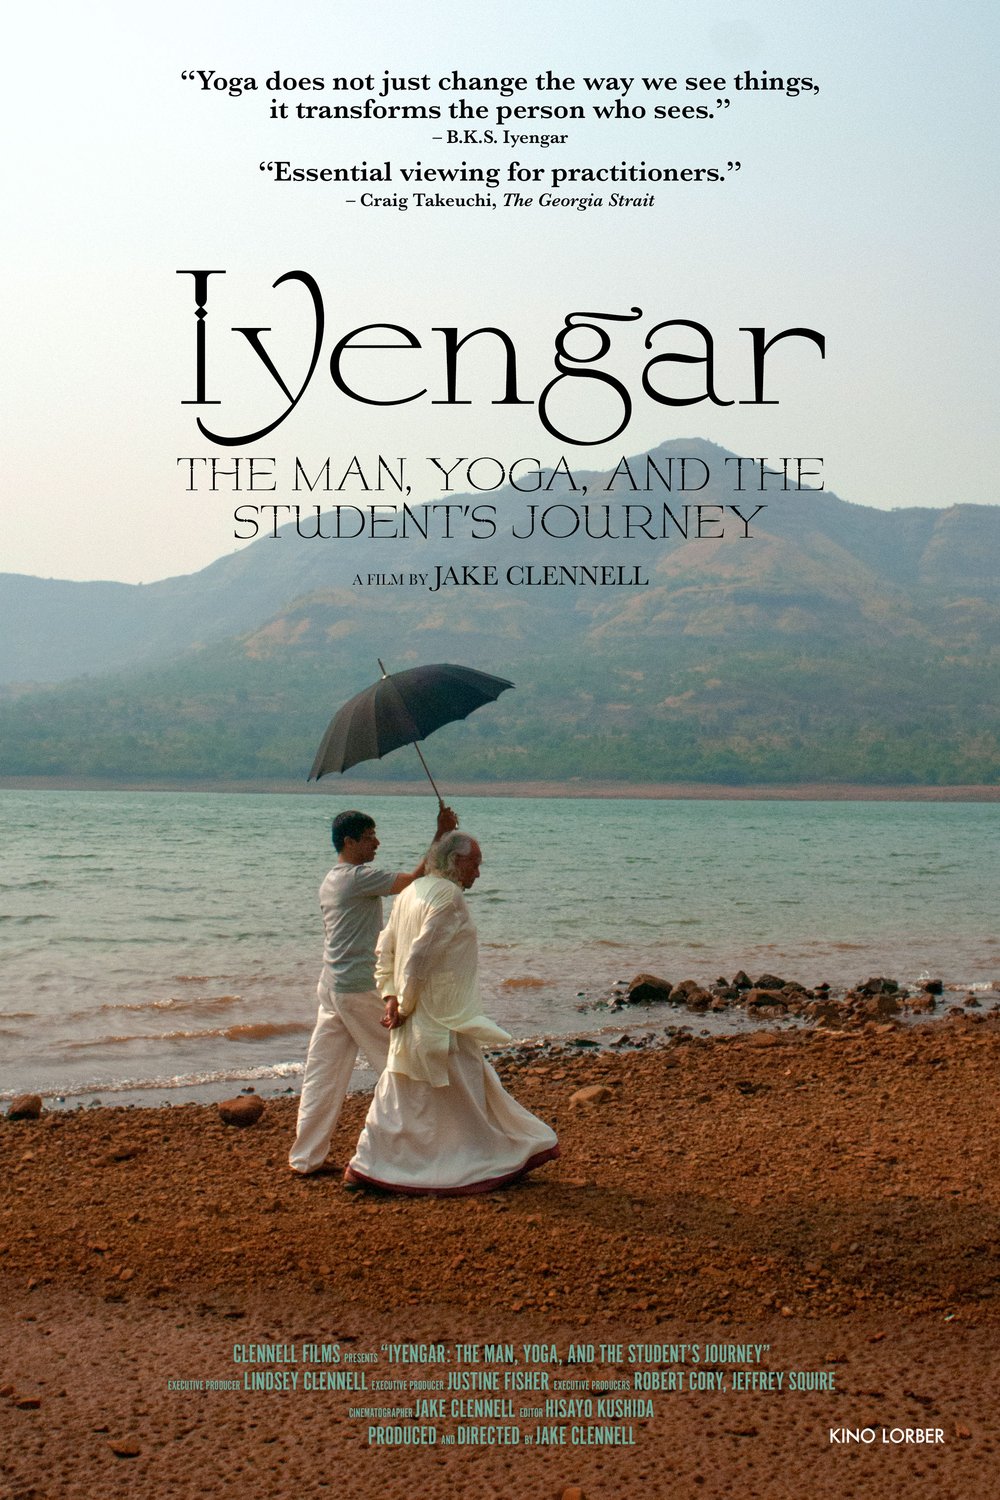 Poster of the movie Iyengar: The man, yoga, and the student's journey